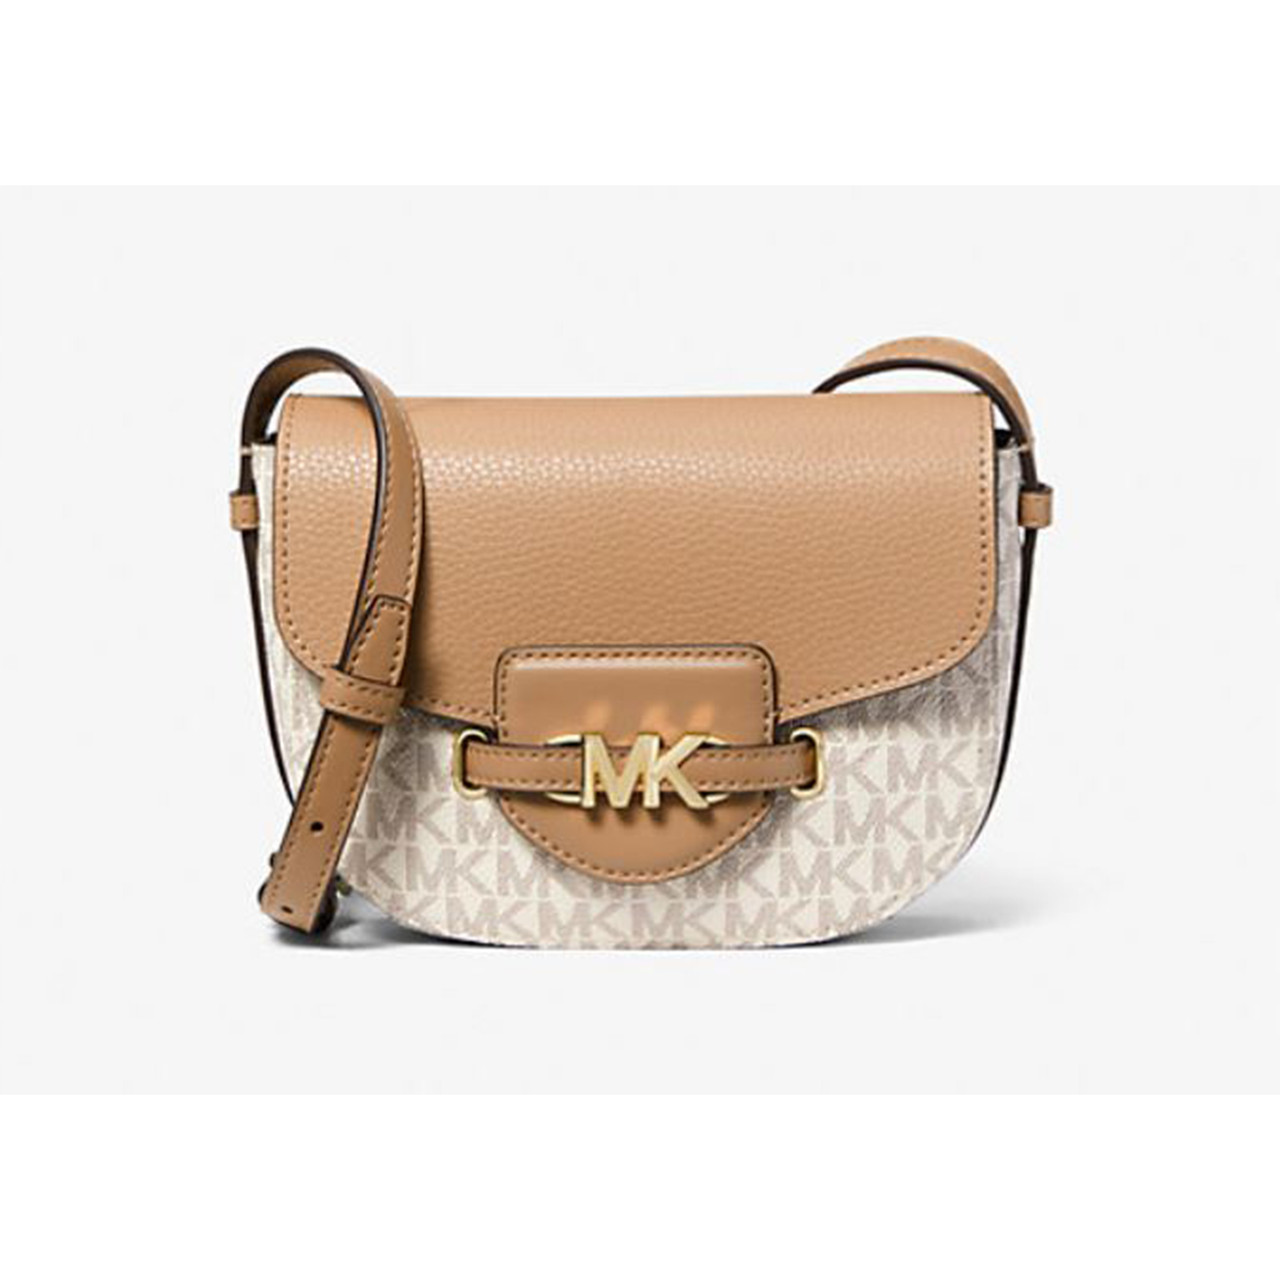 Reed Small Pebbled Leather Crossbody Bag